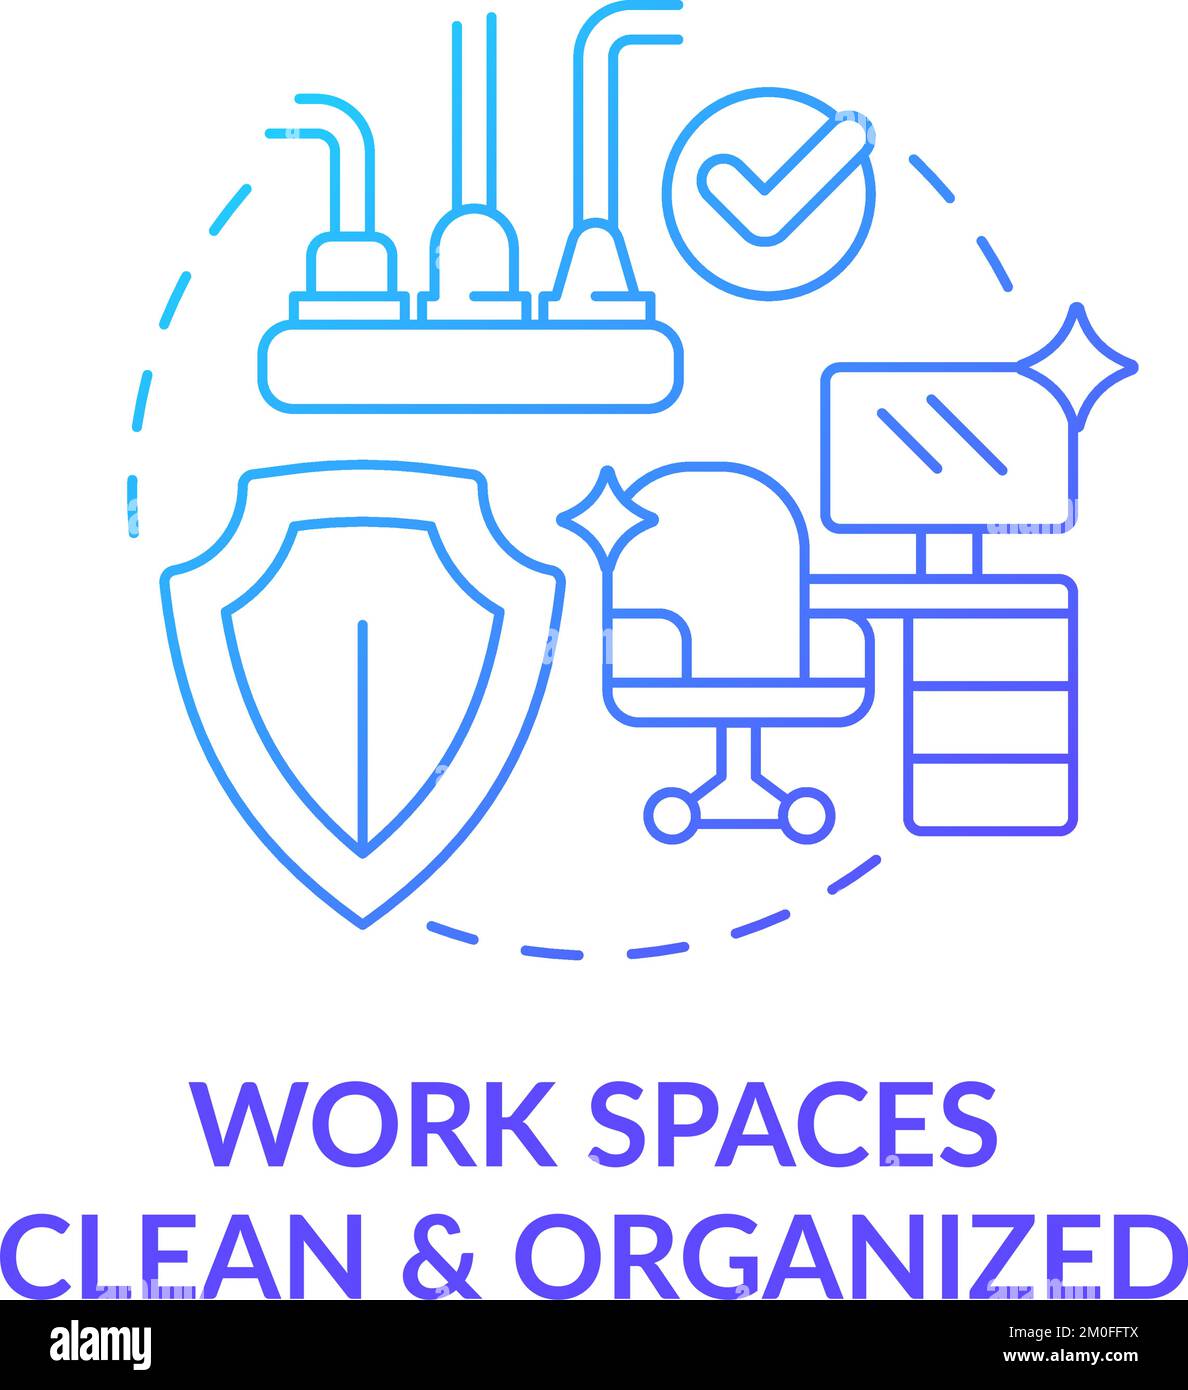 Clean and organized work spaces blue gradient concept icon Stock Vector